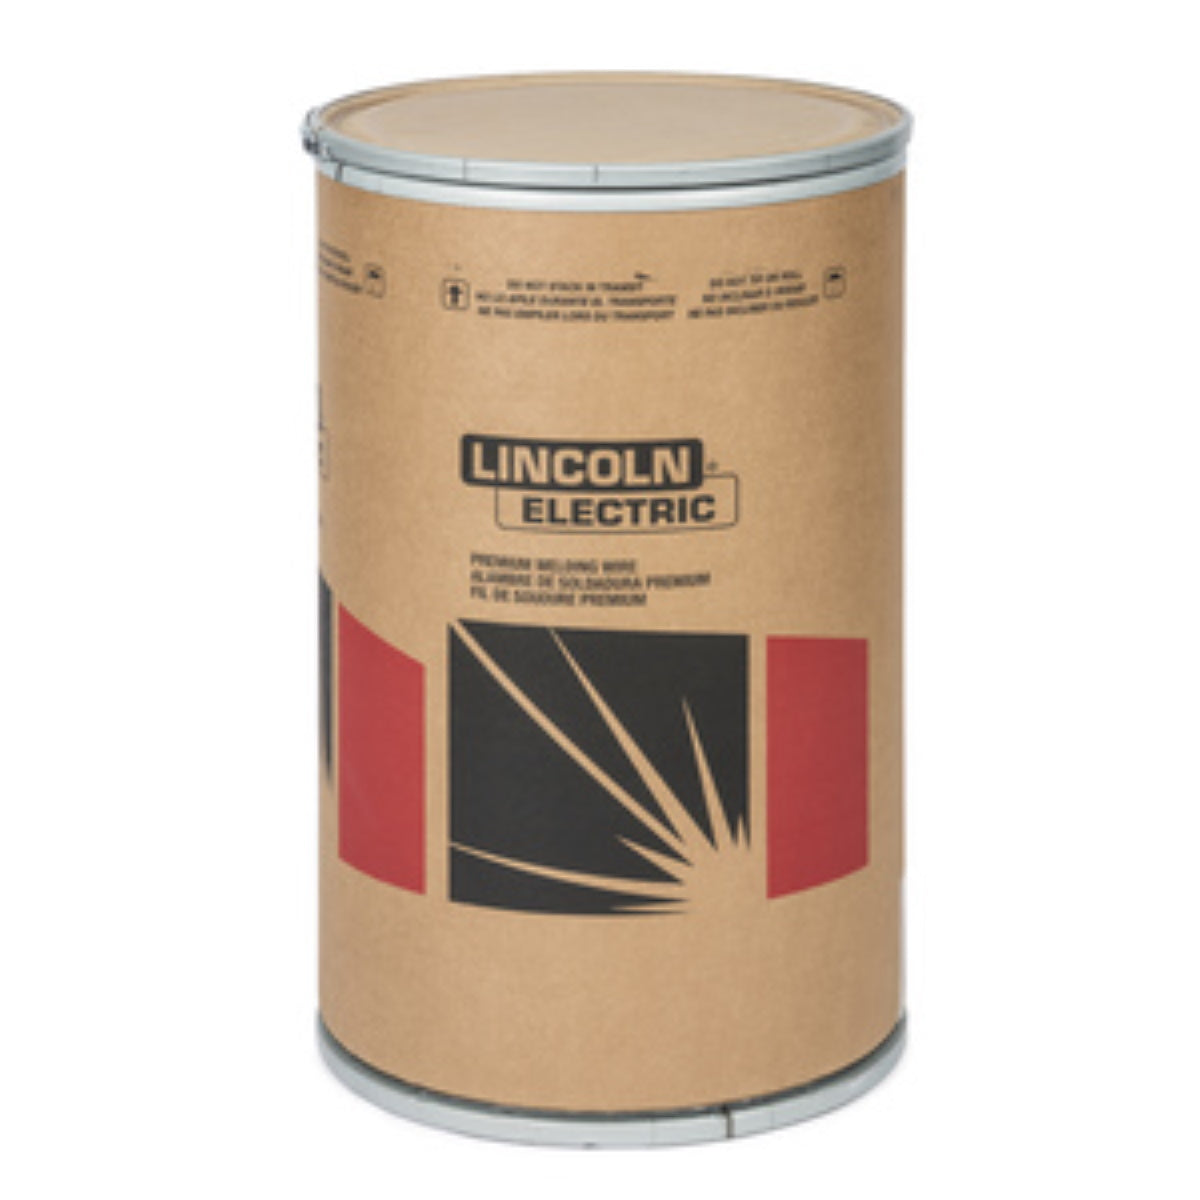 Lincoln Murex 308LSI Stainless MIG Wire .045 500lb Drum (ED0035605)